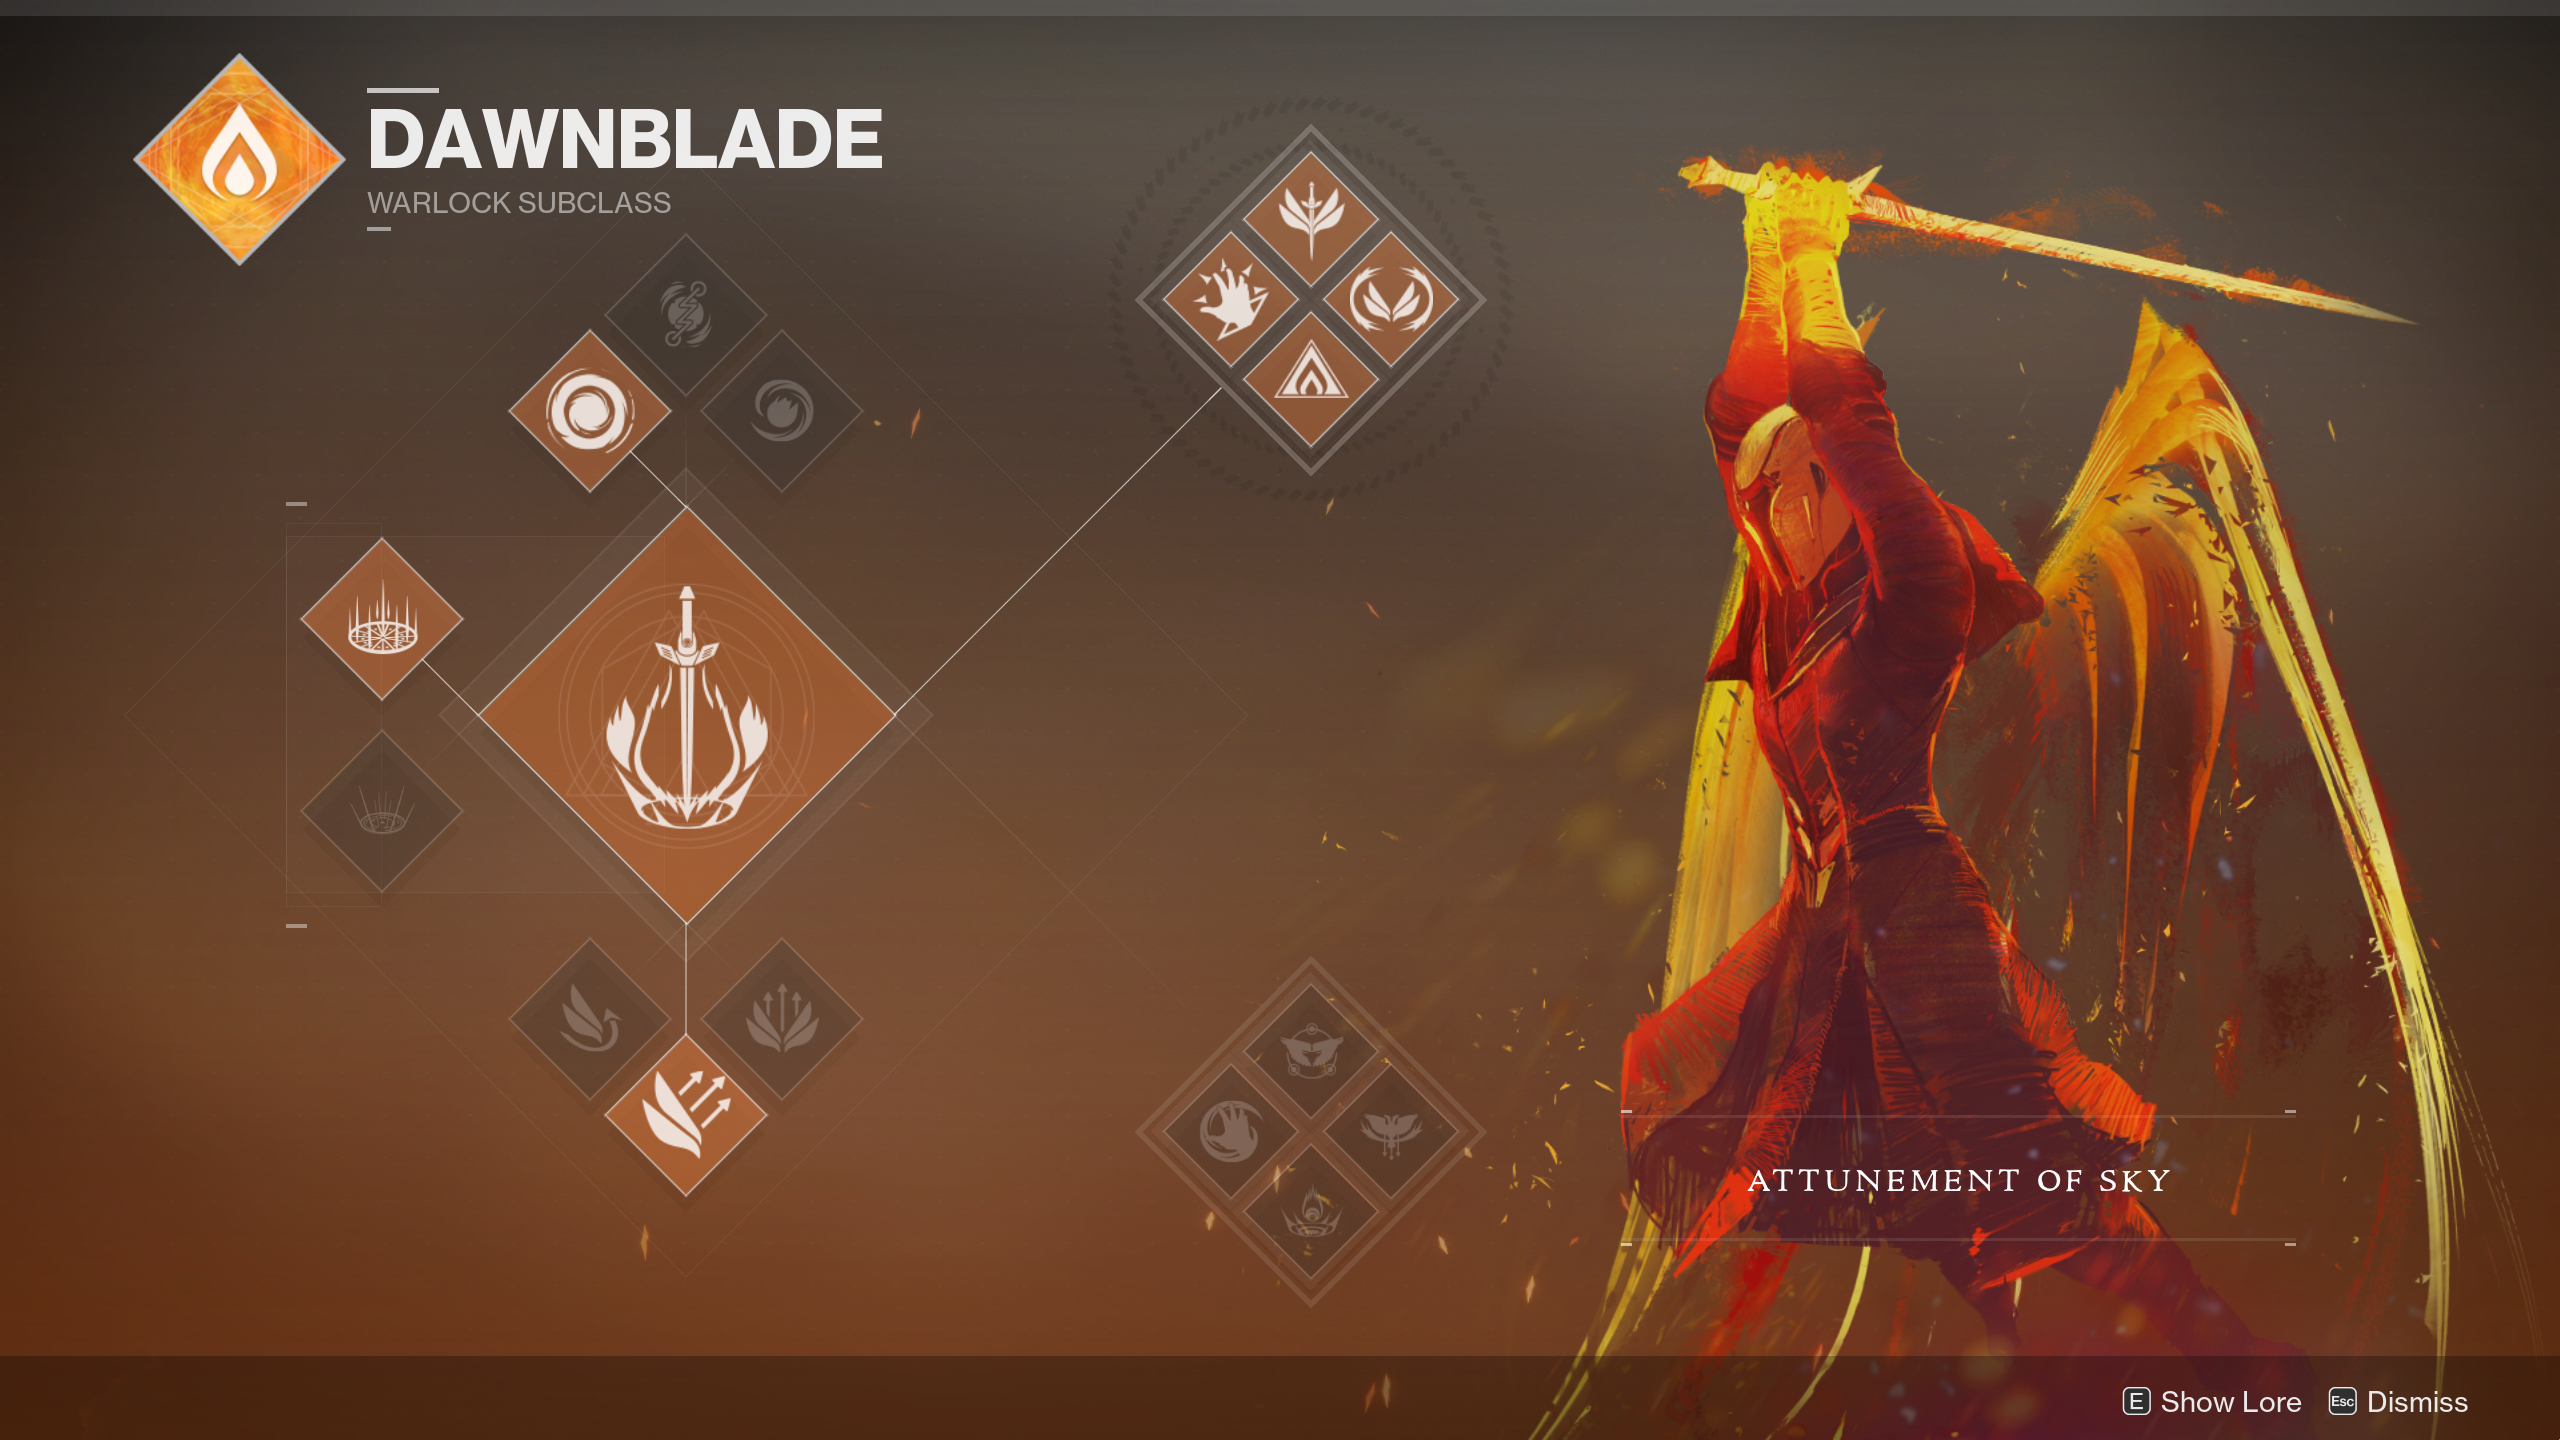 Destiny 2 Classes Your Full Guide To All The Subclasses Abilities And Forsaken Supers Pcgamesn